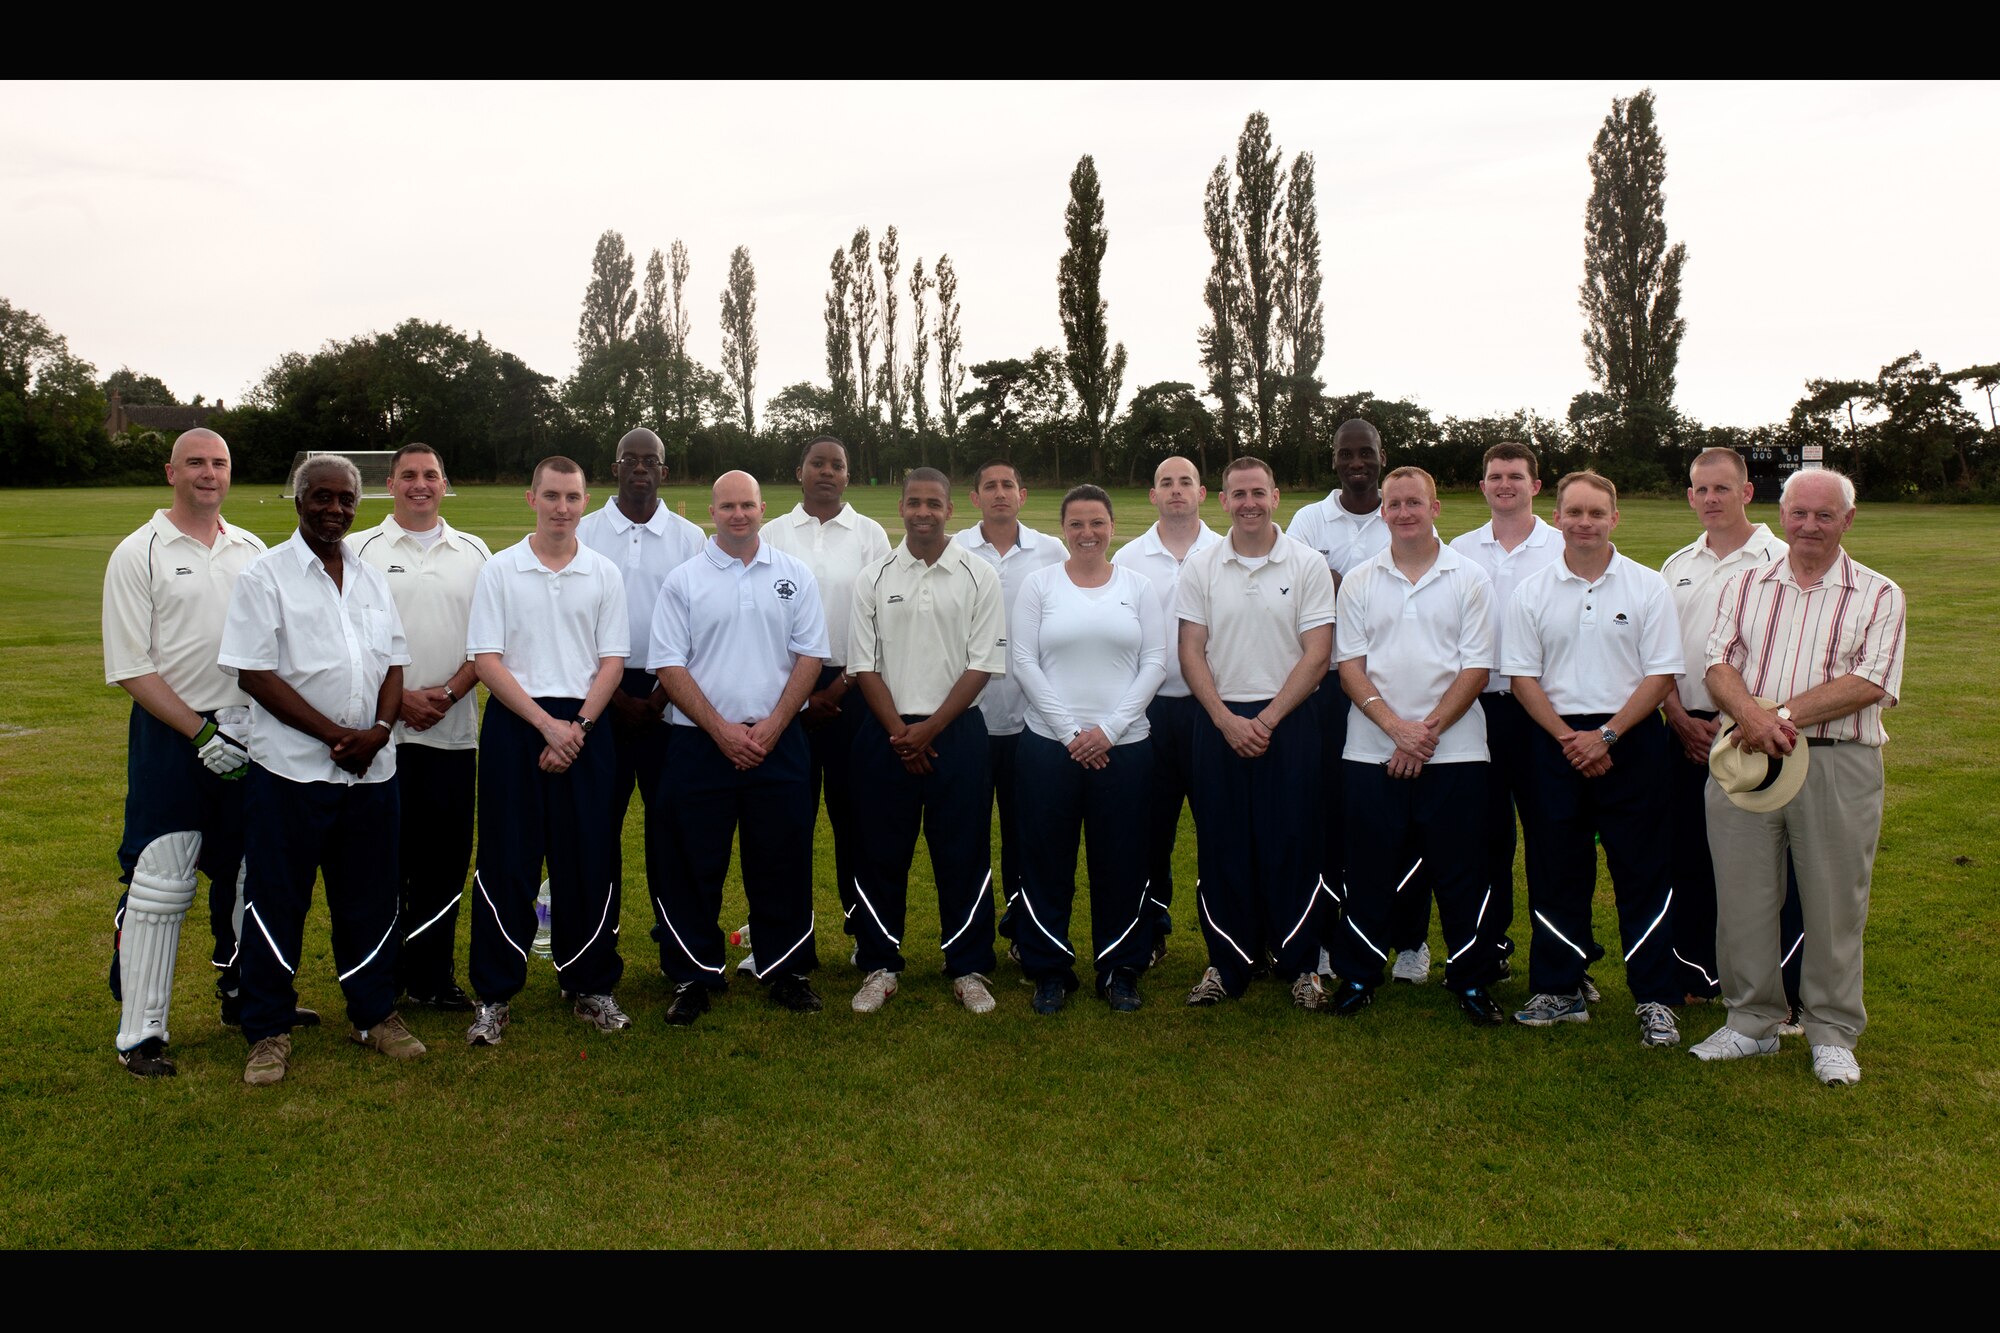 LONGSTANTON, United Kingdom – Members of the 423rd Air Base Group pose for their team picture between innings Aug. 19 at Longstanton Bowls Club in Longstanton, United Kingdom. This was the first ever cricket game the 423rd ABG has played. The team has practiced against themselves the last couple of months to prepare for the game. (U.S. Air Force photo by Master Sgt. John Barton)